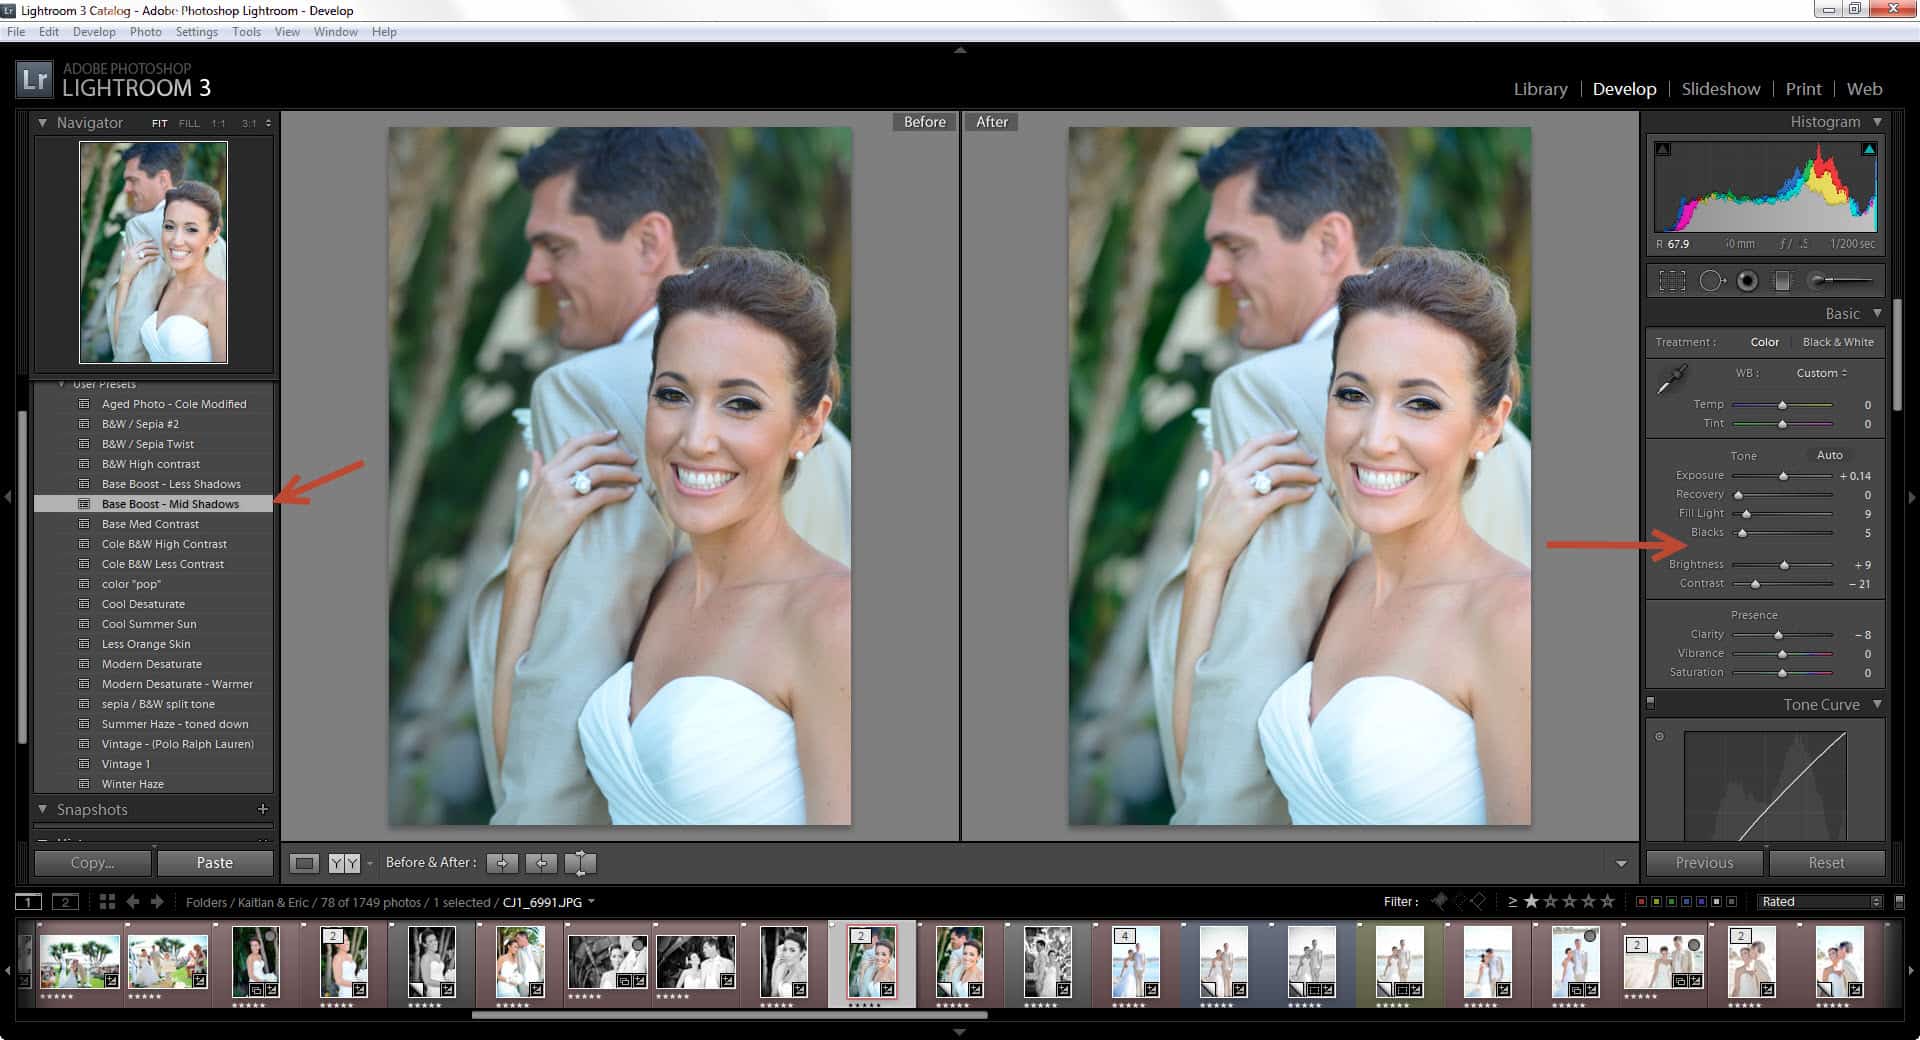 Presets in Adobe Lightroom to Automate Workflow & “Pop” to Images!